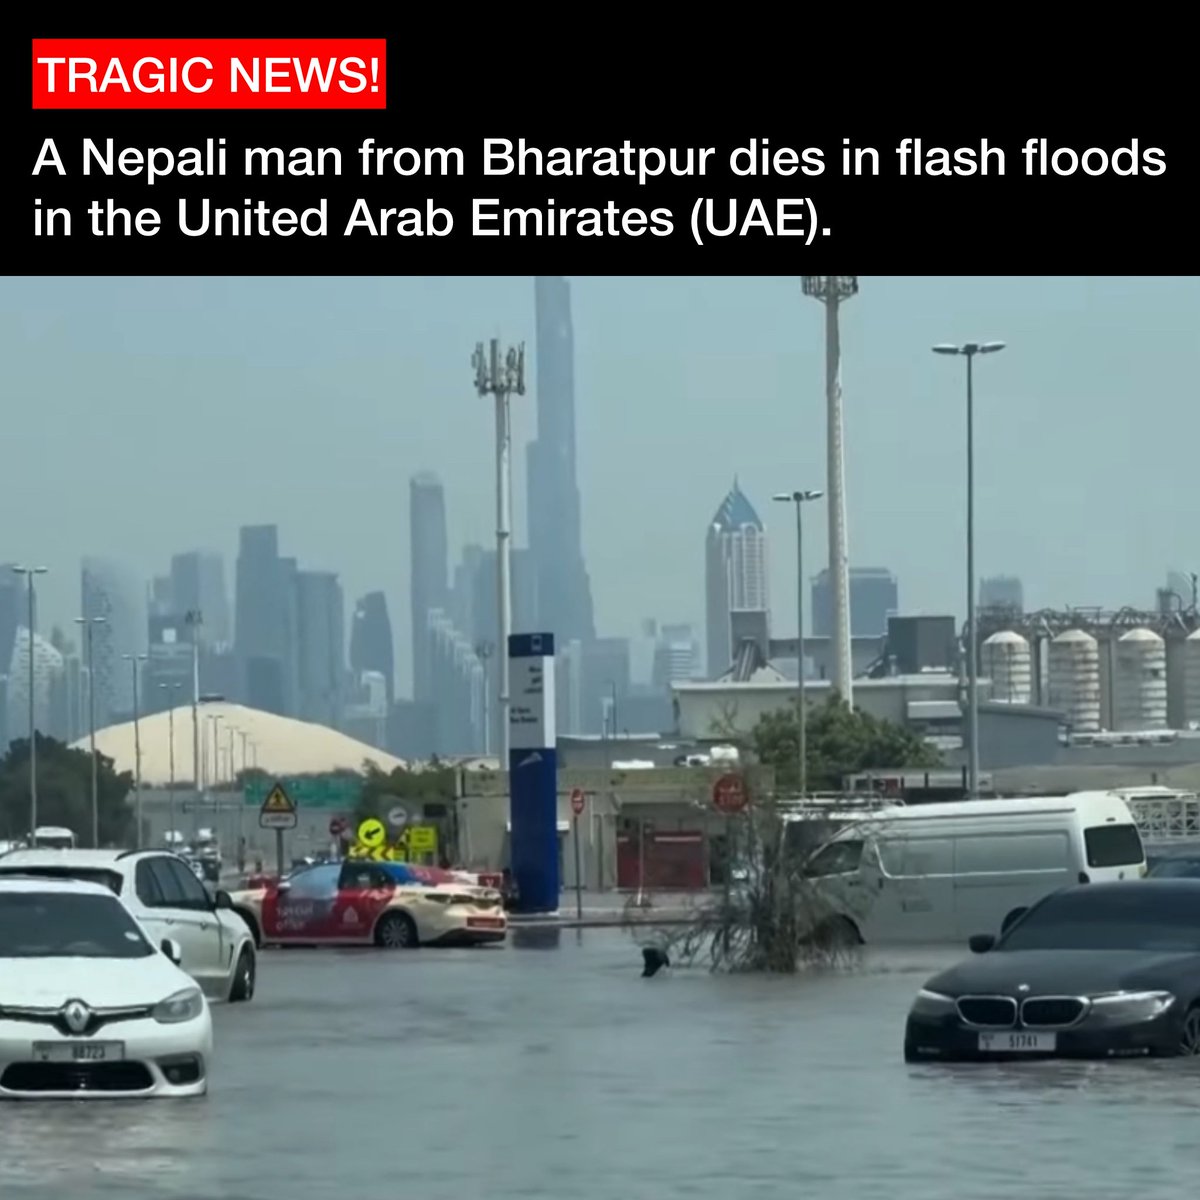 In a tragic incident, a Nepali man from Bharatpur has died in a flash floods in the United Arab Emirates (UAE). The man has been identified as Mohan Pun. He was reported to be employed at the Well Cafe restaurant located in the same vicinity where the incident occurred. 

#uae